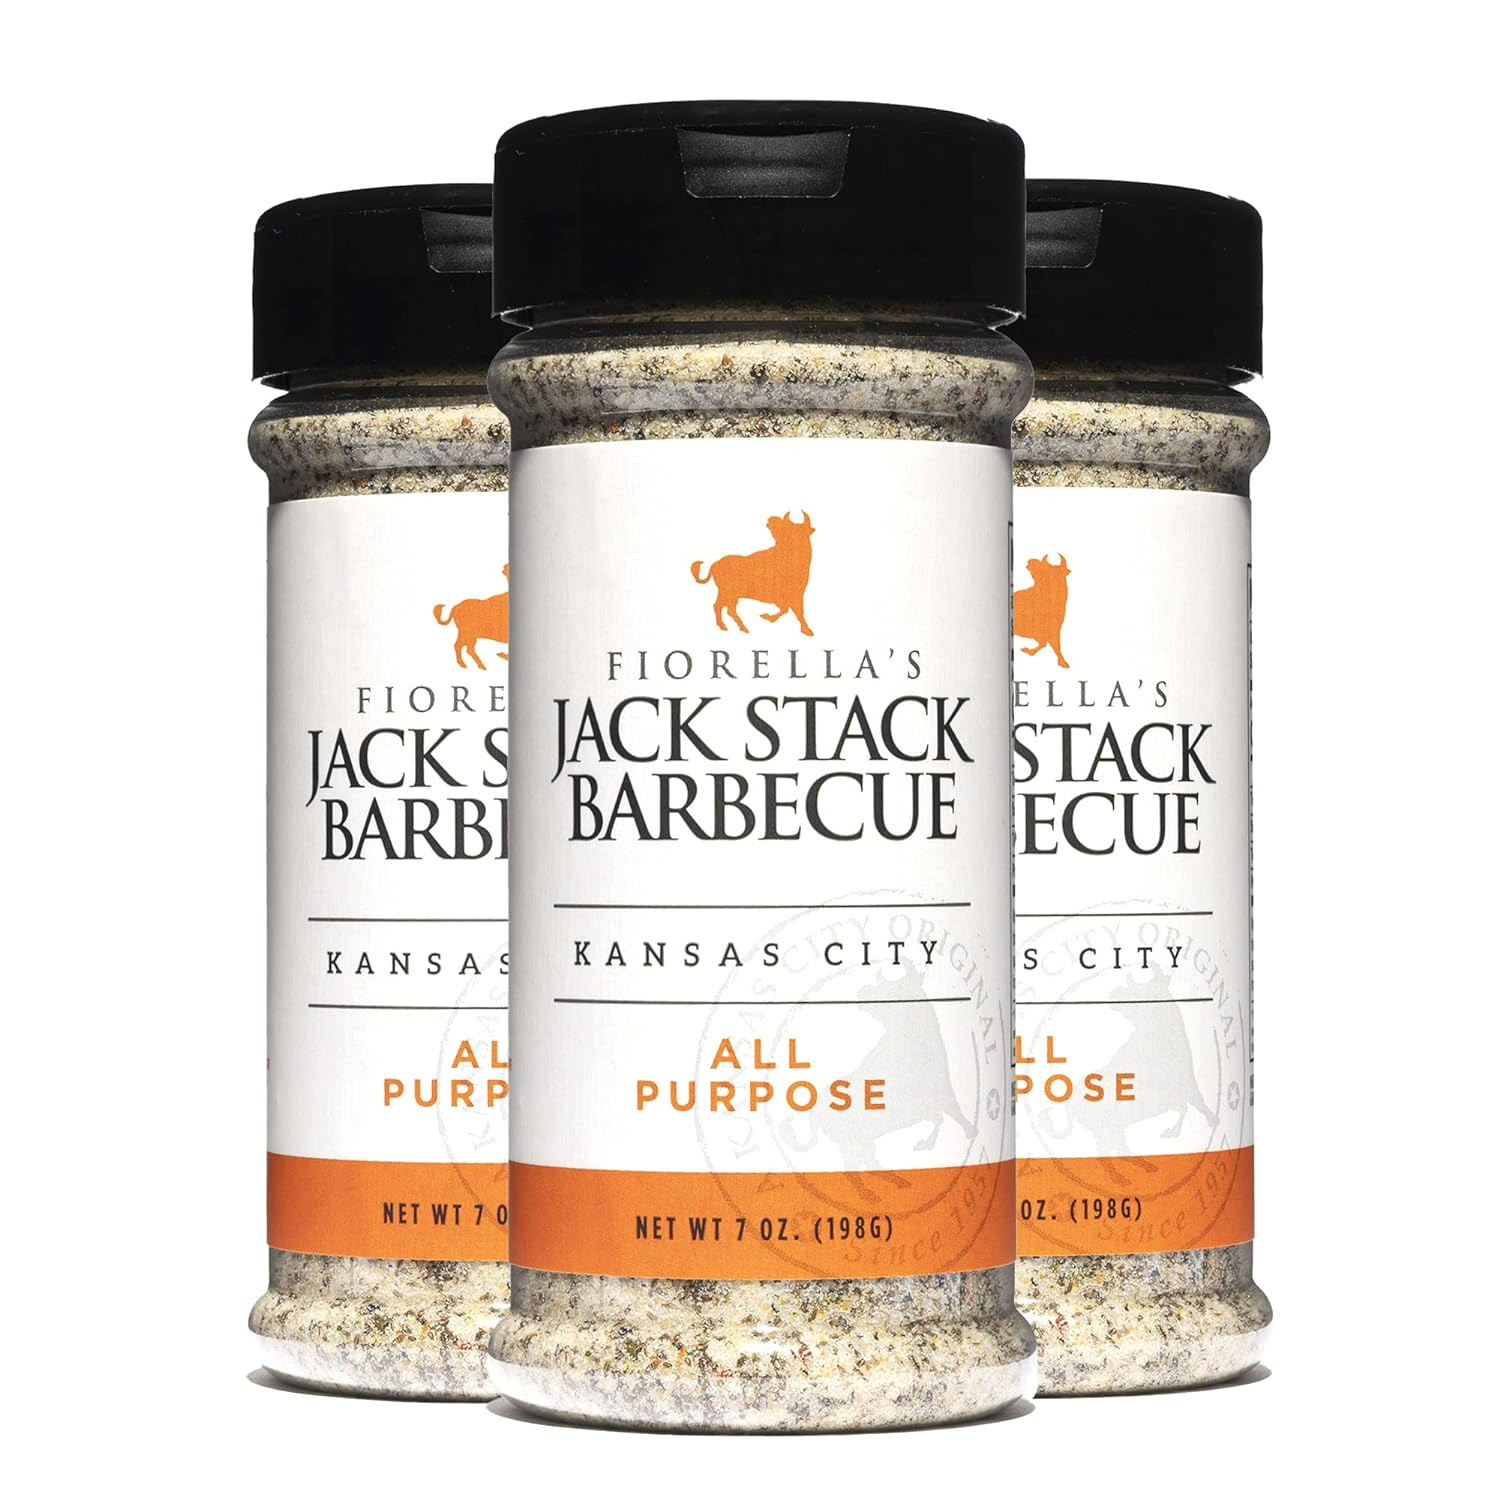 Jack Stack Barbecue All Purpose Dry Rub Seasoning - Kansas City Spice 3 Pack - for Chicken, Beef, Ribs, Vegetables, Seafood, and More (7oz Each) - Barbecue Whizz...Watch My Smoke!